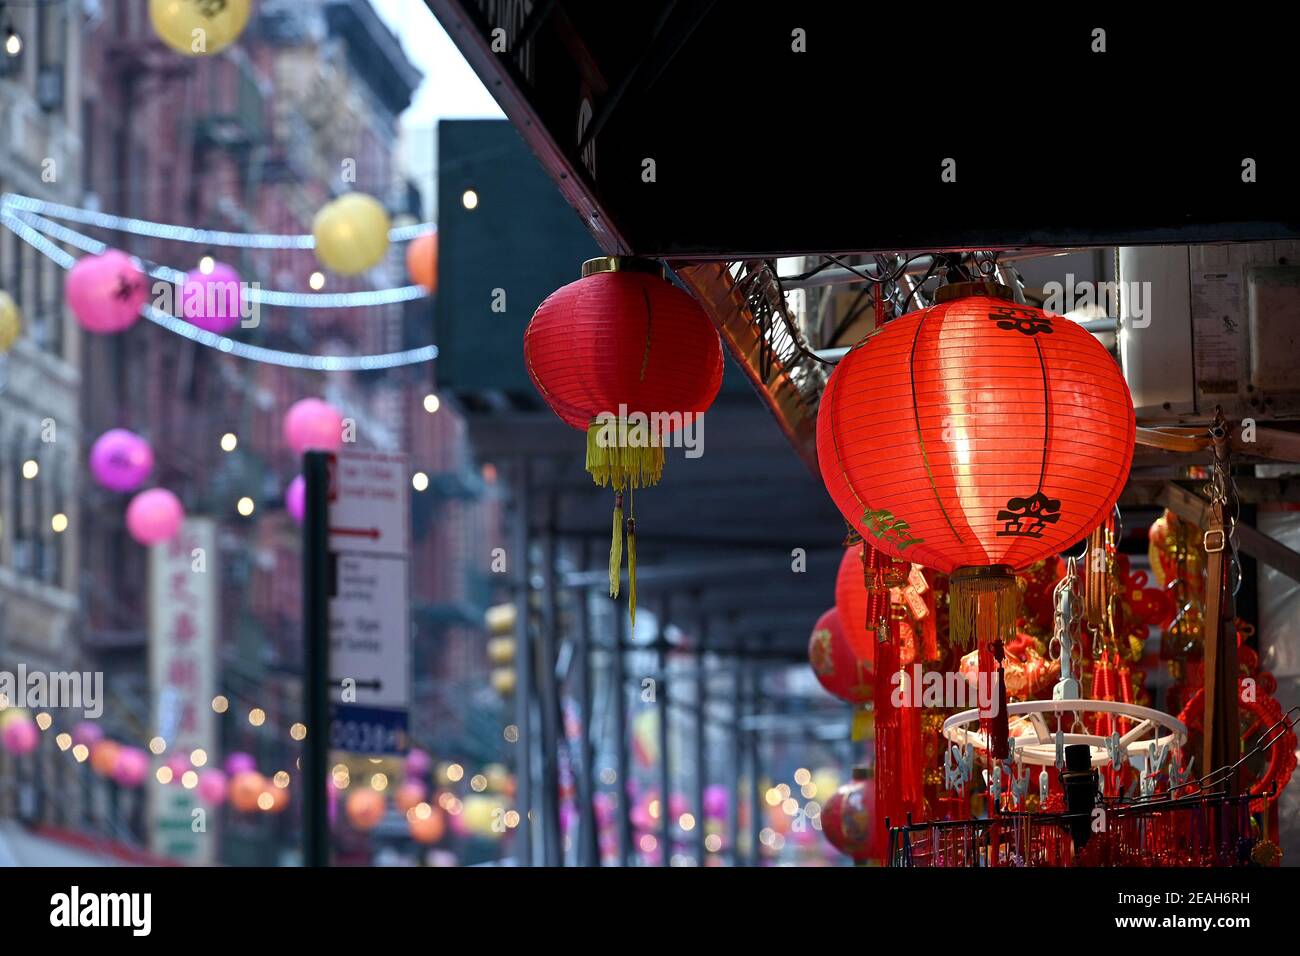 New York, USA. 09th Feb, 2021. Decorative lanterns hang above Mott street in Manhattan's Chinatown district before the start of the Chinese Lunar New Year, New York, NY, February 9, 2021. Members of the Chinese community and other asian cultures will celebrate the Chinese Lunar New Year, the year of the OX, starting on February 12, and lasting through January 31st, it is considered the most important holiday in China. (Photo by Anthony Behar/Sipa USA) Credit: Sipa USA/Alamy Live News Stock Photo